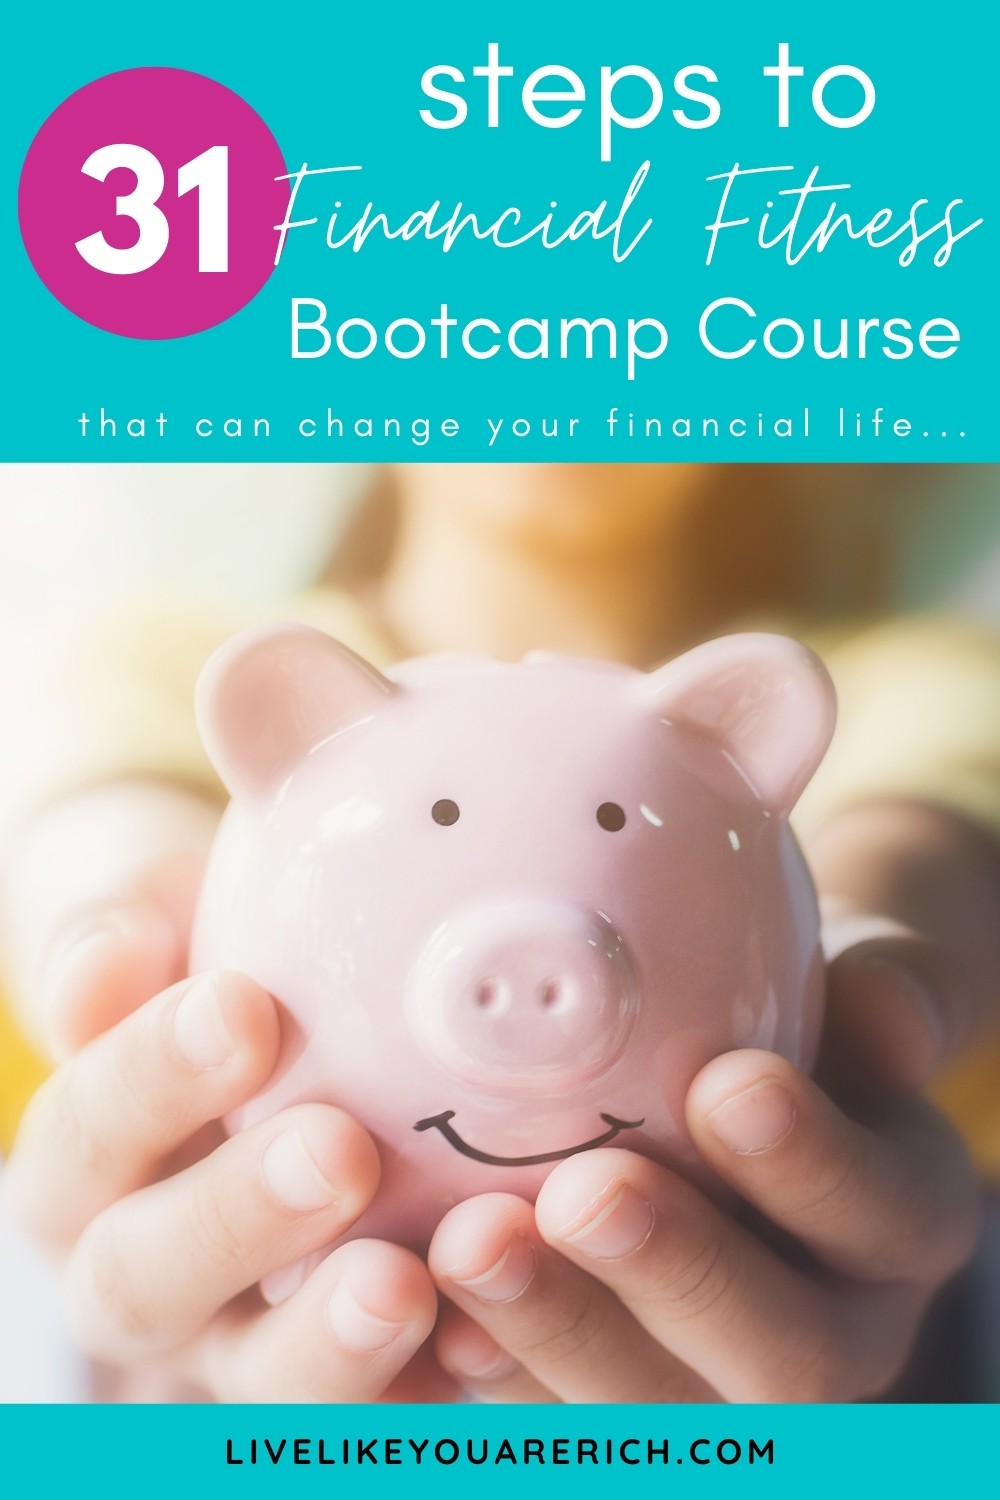 Do you feel like you are never going to make it out of debt? If so, you’re in the right place. Check out this step-by-step financial fitness Bootcamp course - this FREE course and it is for everyone. You will go through 31 steps. Each step is a task or challenge. You'll get access to financial principles that work, helpful and effective pointers, money-saving, and money-making tips. #financialfitness #debtfree